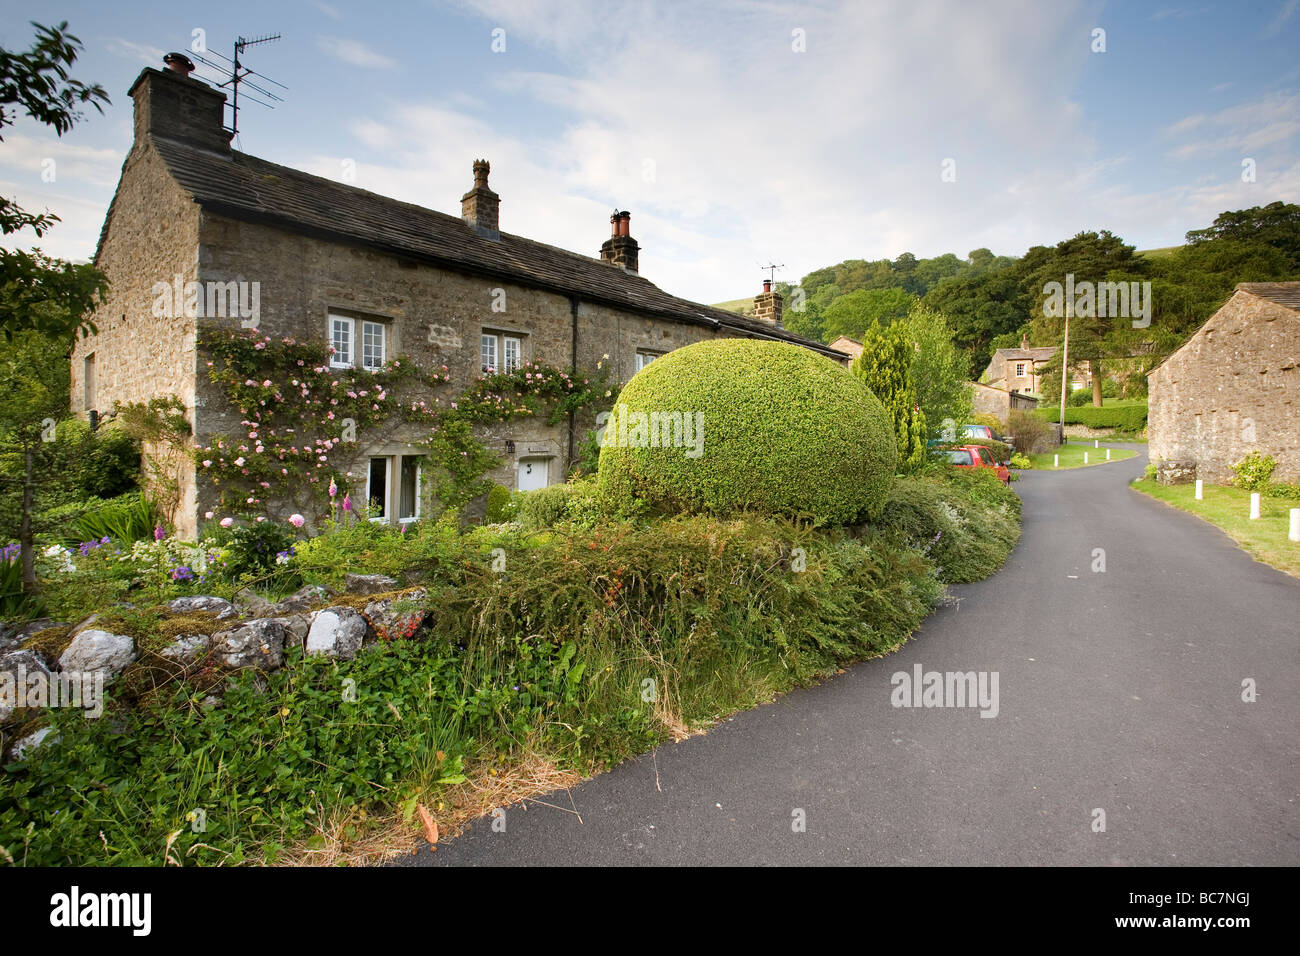 Traditional stone cottages in the Yorkshire Dales village of Starbotton Wharfedale Yorkshire Dales UK Stock Photo